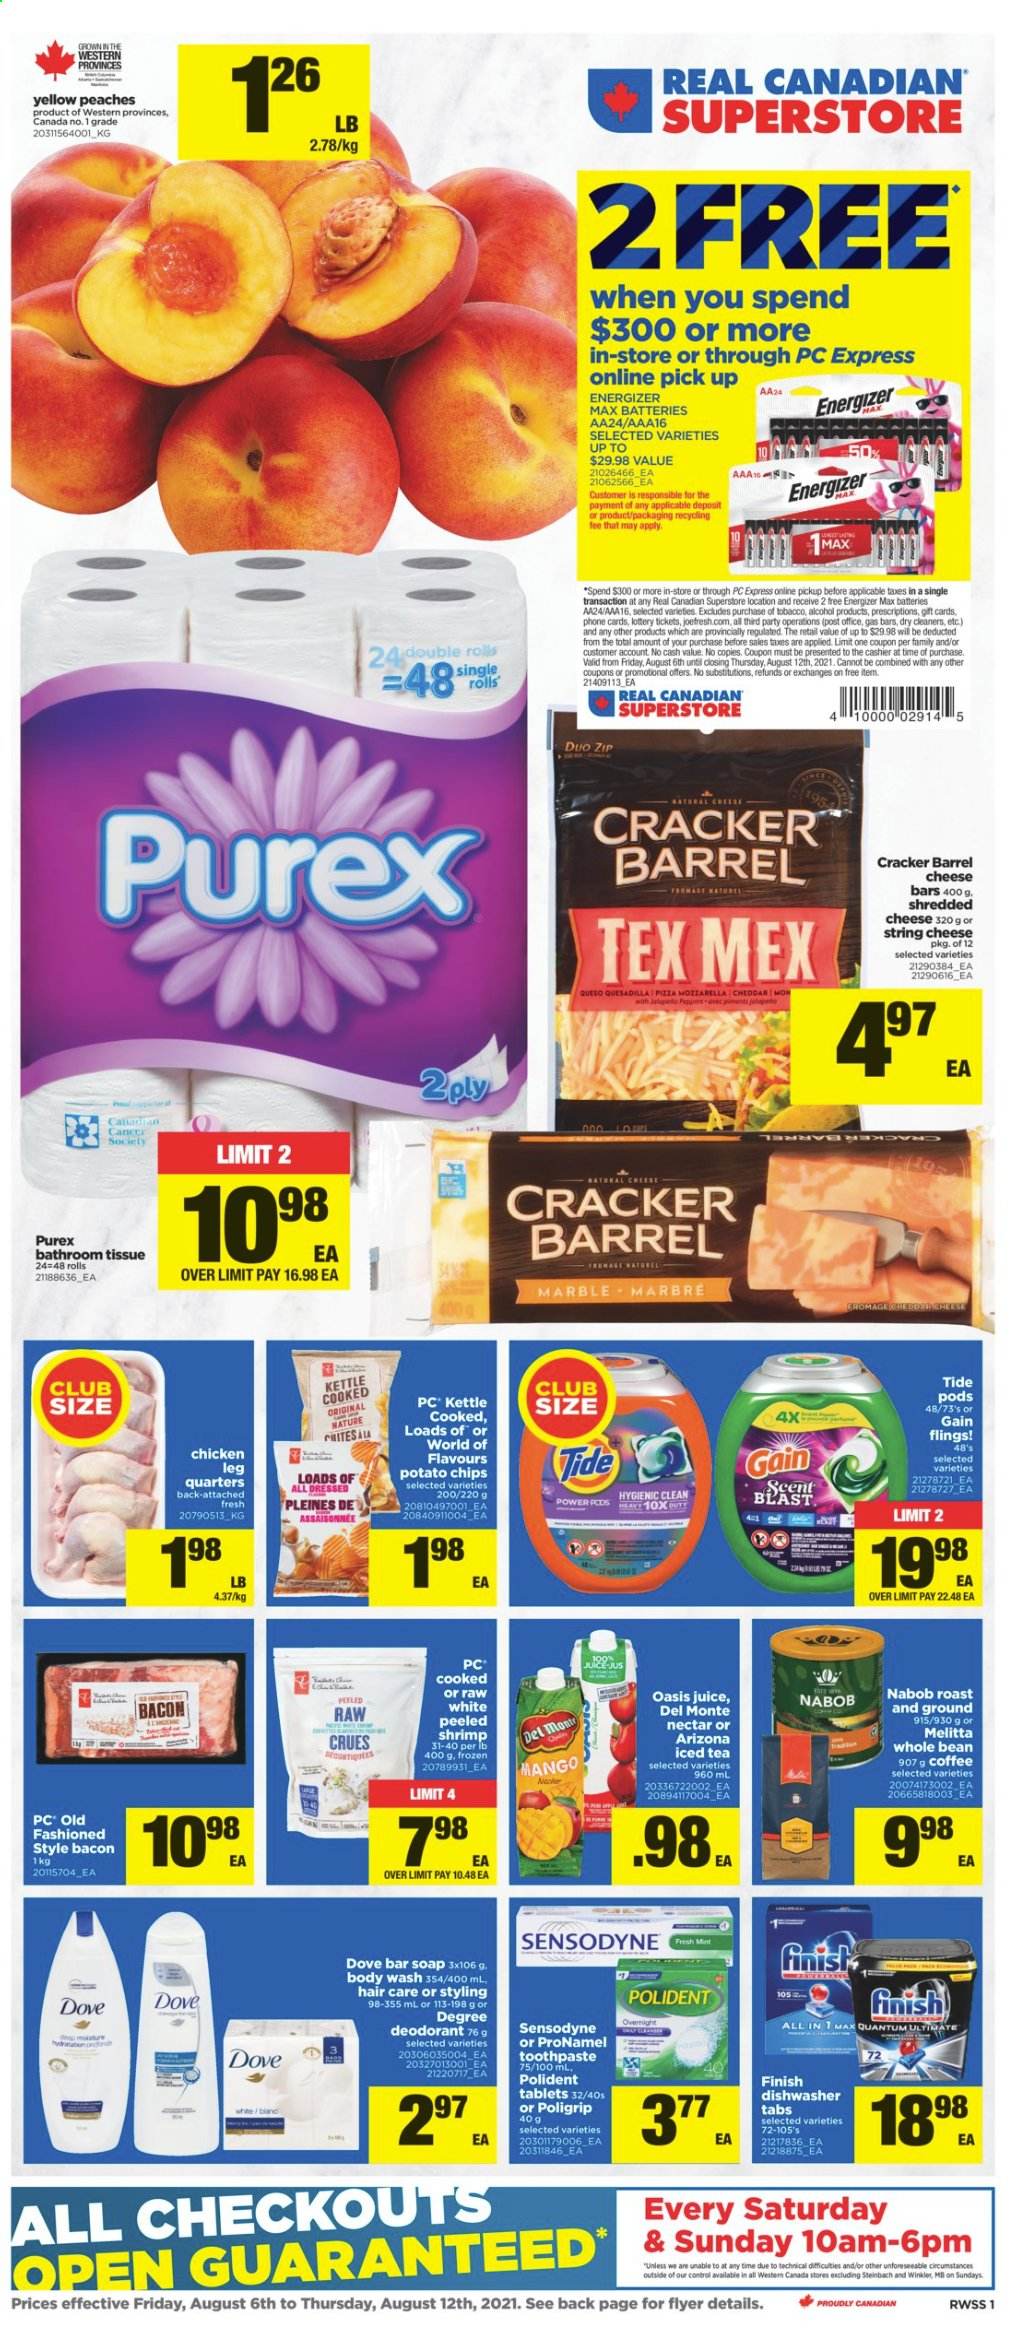 thumbnail - Real Canadian Superstore Flyer - August 06, 2021 - August 12, 2021 - Sales products - mango, peaches, pizza, bacon, shredded cheese, string cheese, crackers, potato chips, juice, ice tea, AriZona, coffee, alcohol, chicken legs, bath tissue, Gain, Tide, Purex, body wash, soap bar, soap, toothpaste, Polident, anti-perspirant, battery, Sensodyne, deodorant. Page 1.